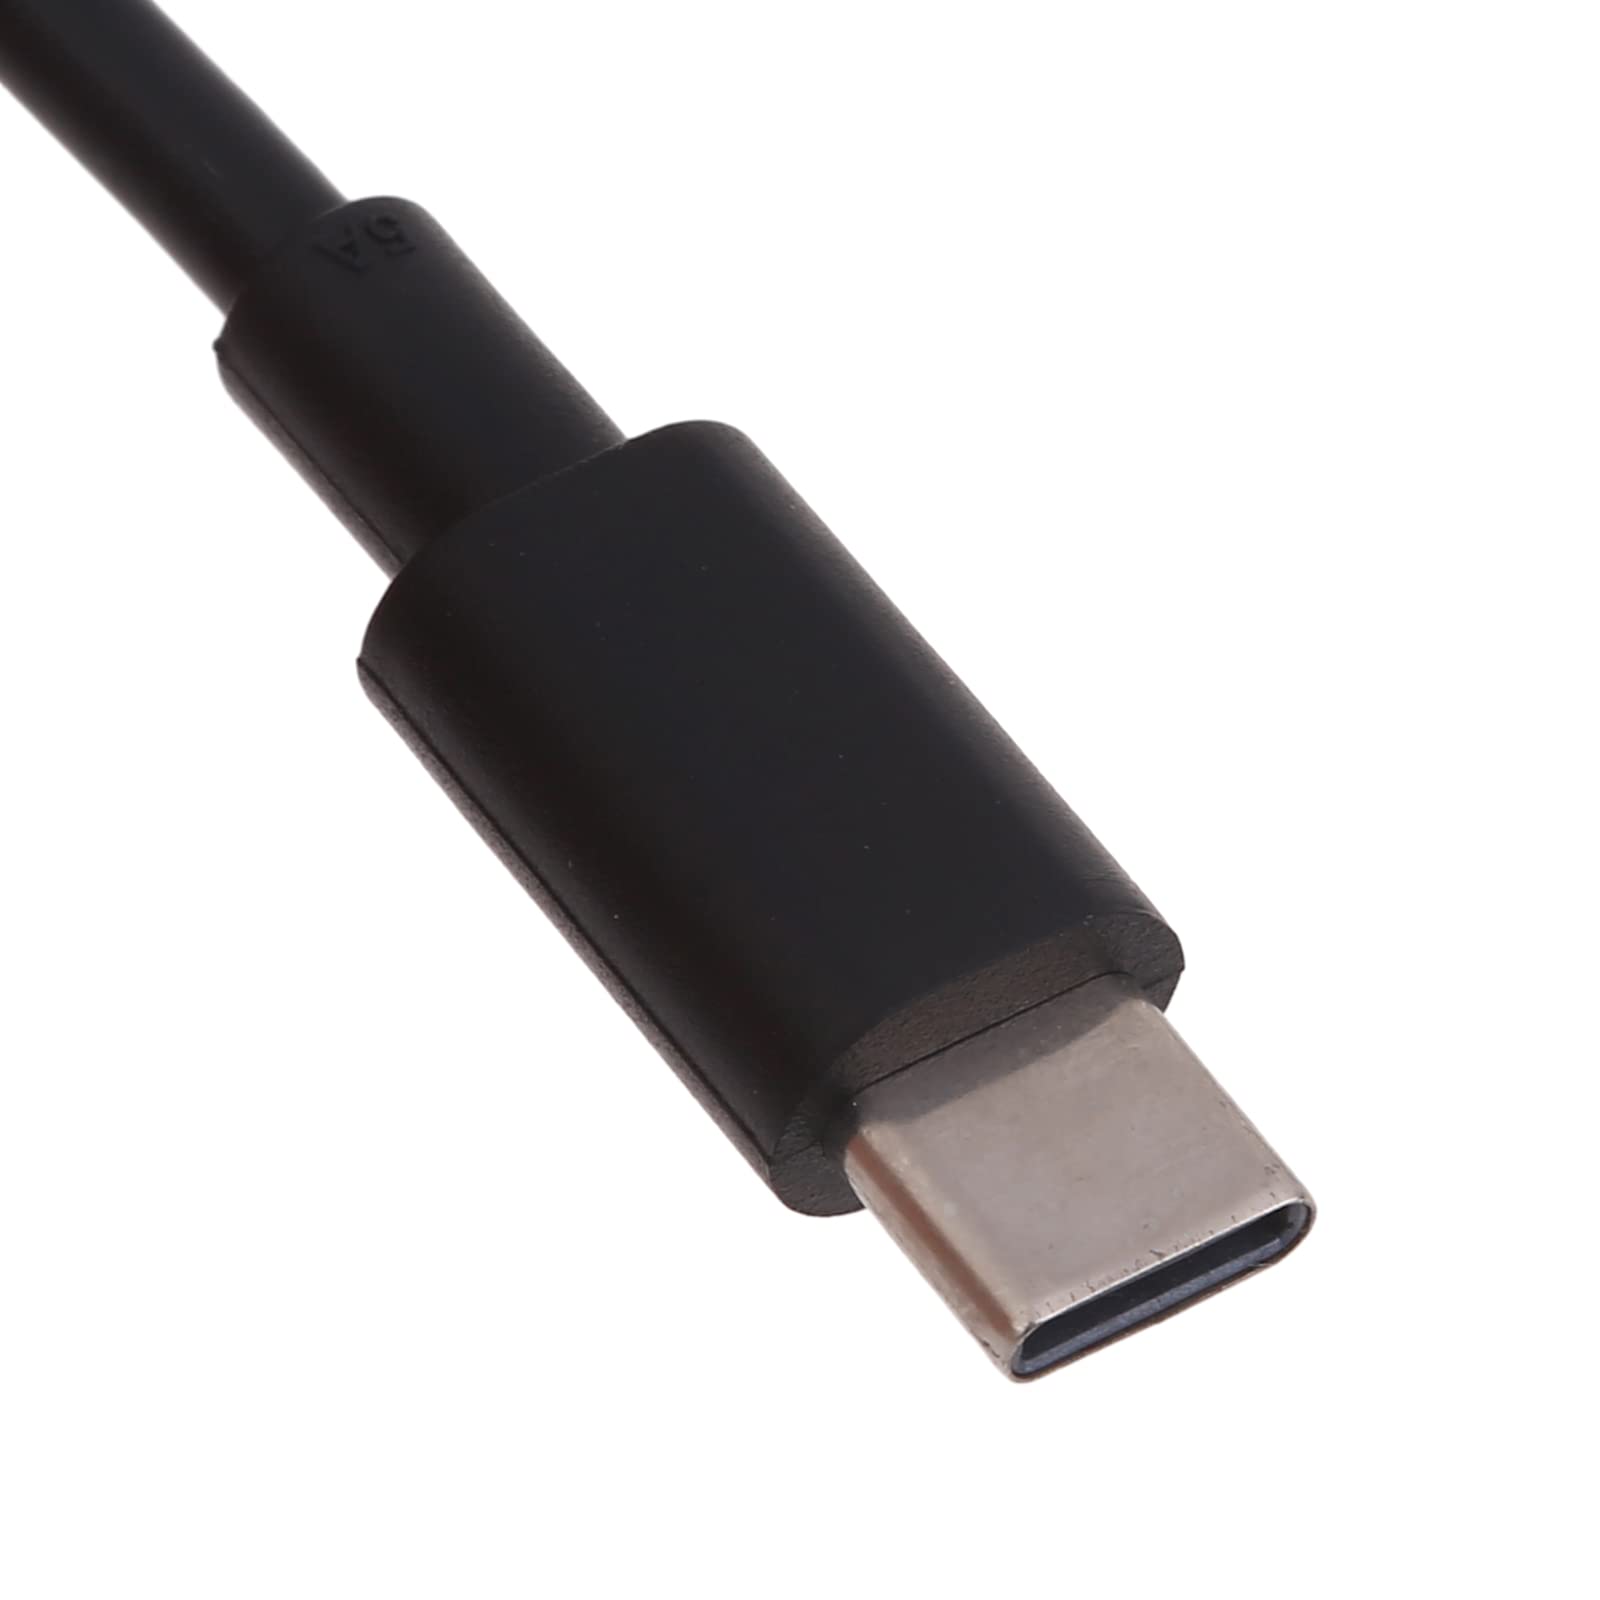 hejhncii Power Switch Cable for RaspberryPi 4, USB C Male to Female Type C Extension Cable with On/Off Switch